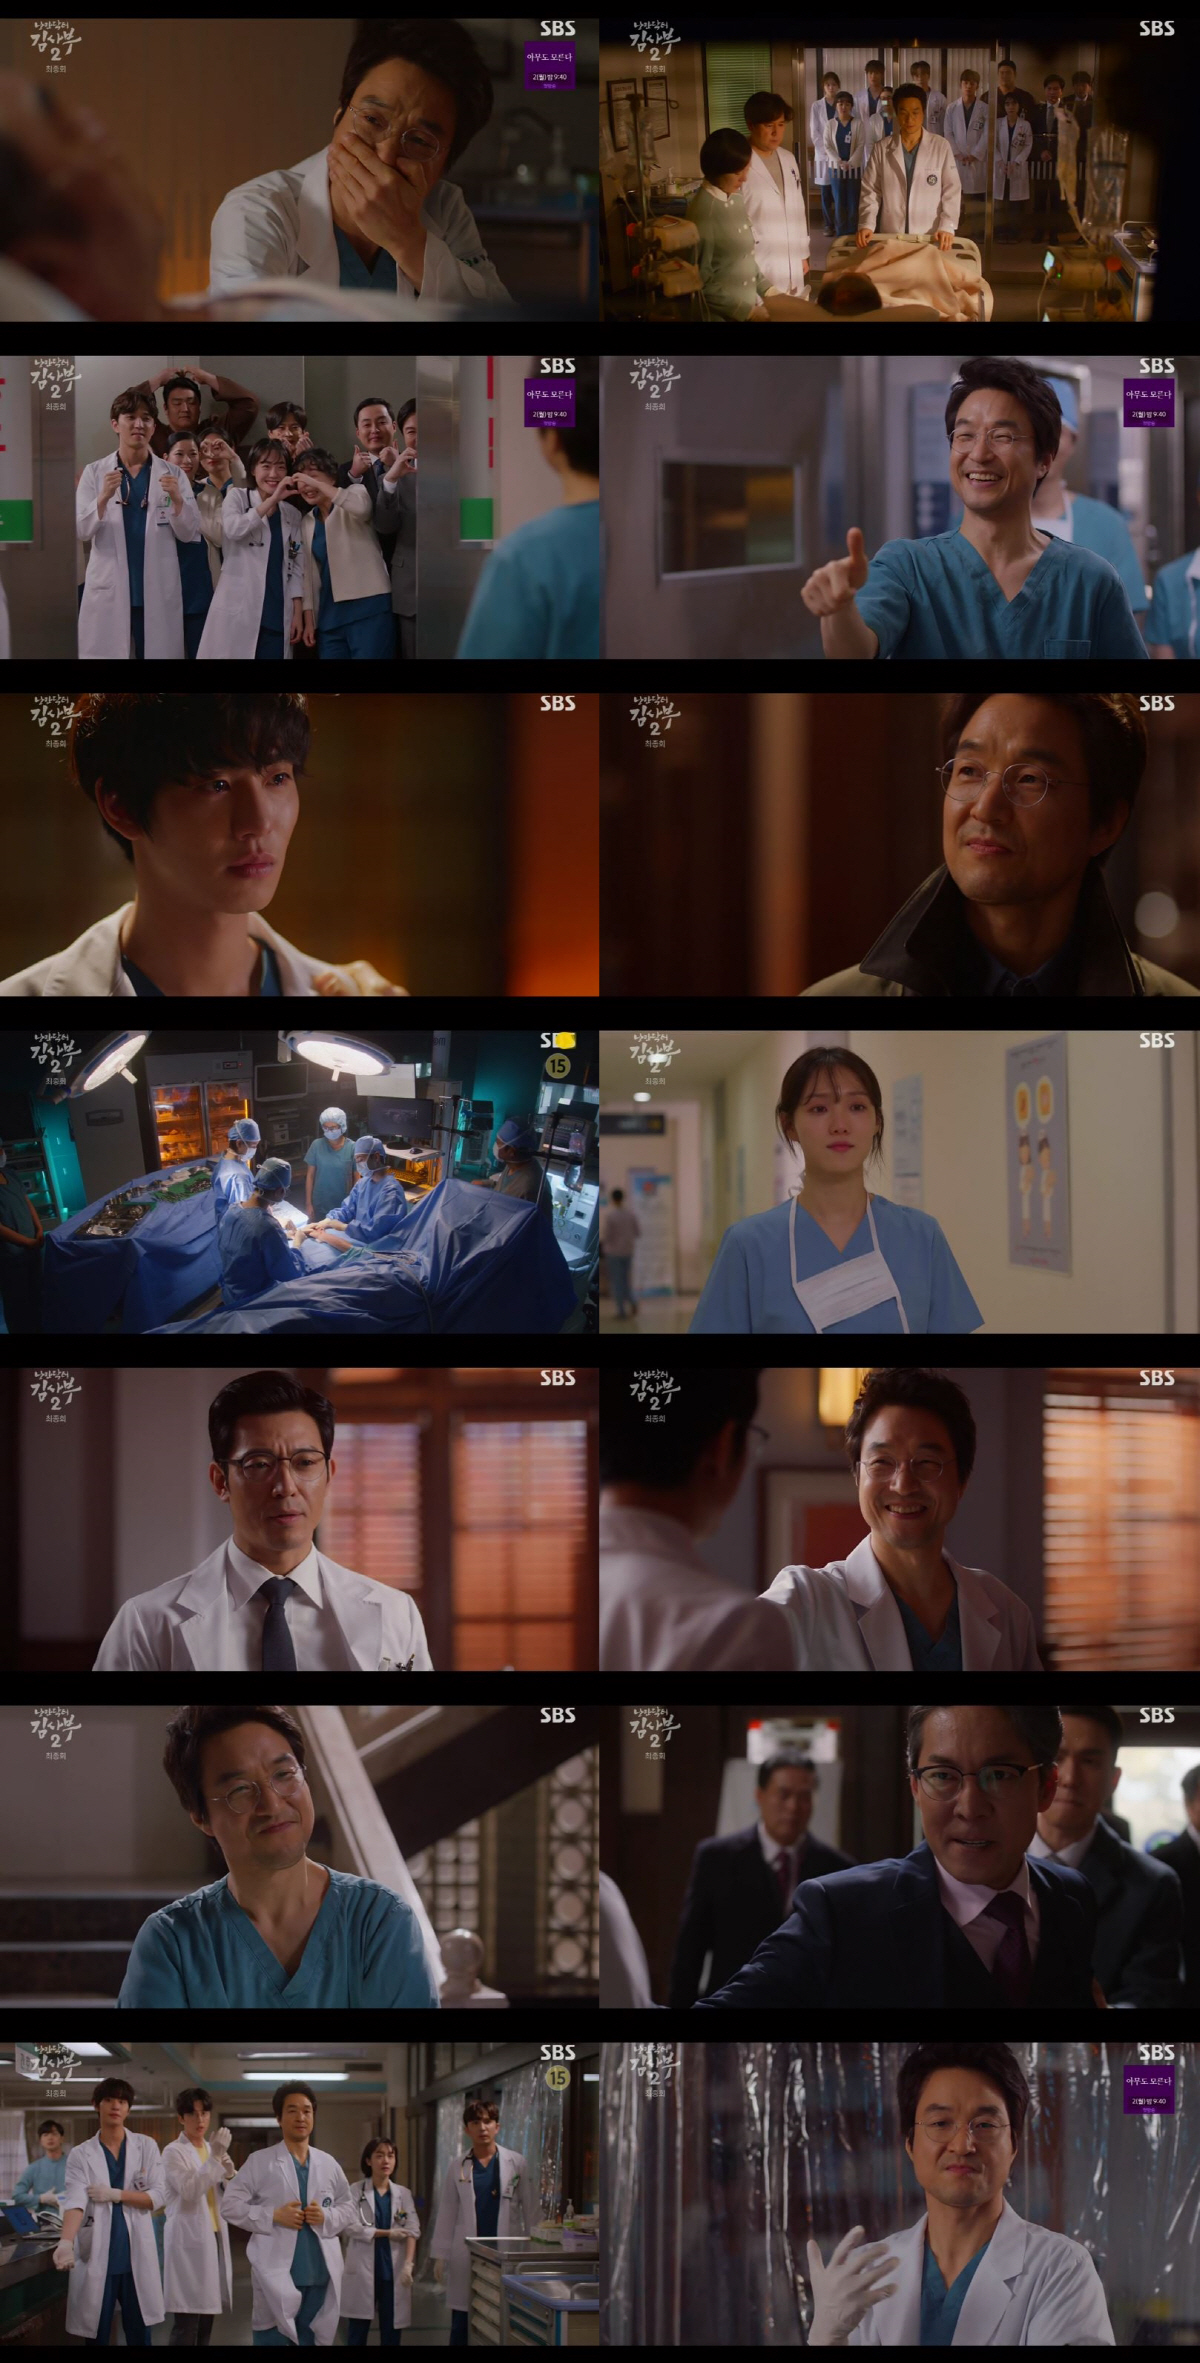 Romantic Doctor Kim Sabu 2 ended with raising expectations for next season.In the final episode of SBSs drama Romantic Doctor Kim Sabu 2 (played by Kang Eun-kyung and directed by Yoo In-sik, Lee Gil-bok), which was broadcast on the 25th, Seo Woo-jin (Ahn Hyo-seop) and Cha Eun-jae (Lee Sung-kyung) were shown to confirm each others hearts and develop into lovers.Cha Eun-jae decided not to return to the hospital but to stay at the Doldam Hospital, showing a further growth and expecting the future of young doctors.Kim Sabu (Han Suk-kyu), who had caused viewers to worry, also had surgery for carpal tube syndrome; as a result of the surgery, Kim Sabus disease was multiple sclerosis.Bae Moon-jung (Shin Dong-wook) performed the surgery, successfully completed the surgery, and extended the cadet of Kim Sa-bu as a medical person. In addition, Kim Sa-bu also embraced Park Min-guk (Kim Joo-hun), who quit the big hospital.Park Min-guk met with Kim, declaring, We will create a trauma center for Doldam Hospital in three years.The hospital, which had been in the hands of Do Yun-wan (Choi Jin-ho) under the Geo University Hospital, was granted permission from a medical corporation and became an independent corporation.Kim said, It is a will left by Chairman Shin Byeong-ho, who promised 4 billion won of support every year from the giant foundation, but the management and hospital system is completely independent. He also prevented Doyun-wan from saying, Cider ending did.Romantic Doctor Kim Sabu 2 started broadcasting on the 6th of last month and received the expectation of viewers in one body.It is the season 2 that returns in about three years, so the curiosity among viewers whether or not the Doldam Hospital will be maintained or not has been amplified. Since the first broadcast, it has been applauded by viewers for continuing its highest audience rating march every day.The final session of Season 2 was 21.1%, 25.4% and 27.1% of Nielsen Korea nationwide.Although it did not exceed its own highest audience rating (27.6%) of Season 1, which was broadcast three years ago, it rose every time, and it was over 27%.The performance of the existing Doldamjas, which leads to season 2 following season 1, has inspired viewers.Han Suk-kyus acting, which is the center of Drama, was hurting when he said two words, and Kim Min-jae, Jin Kyung, and Lim Won-hee, who came back to love, applauded viewers.In addition to this, Season 1 member Yang Se-jong, who appeared at the end of the drama, showed the performance of making the complete of Season 3 expect and made the audience excited.Here was the sum of the new members Ahn Hyo-seop, Lee Sung-kyung and So Ju-yeon.Ahn Hyo-seop and Lee Sung-kyung are love lines centered on growth, and Soju has made viewers excited by a cute love line with Kim Min-jae.Kang Eun-kyungs writing power, which created both Season 1 and Season 2, was enough to bring viewers back to TV.One word of Chider Kim Sabu, who continues to live, gave hope to Korea, and he completed Wellmade Drama with the support of director Yoo In-sik.Thanks to this, the myth of the broadcaster that the sequel is not attractive has disappeared away now. As Season 2 has succeeded after Season 1, expectations for Season 3 are also amplifying.